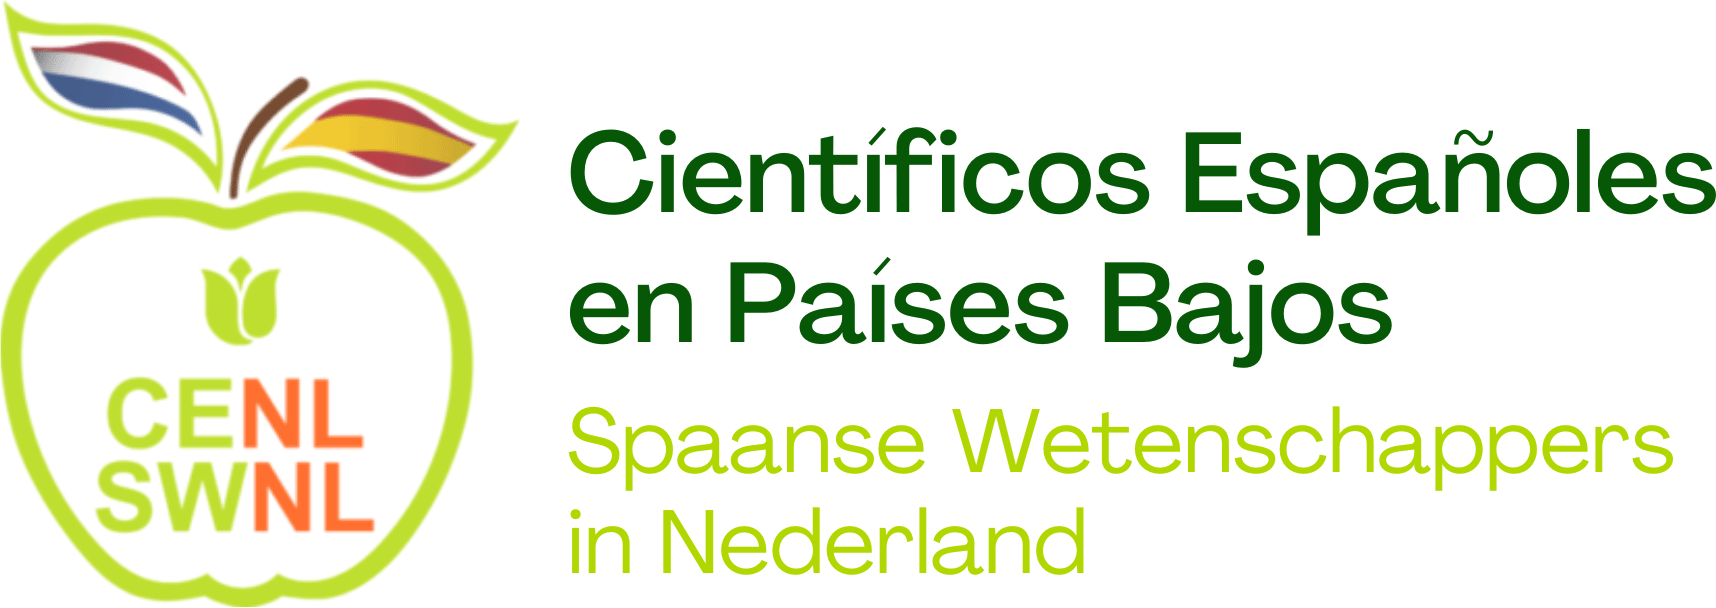 Association of Spanish Scientists in the Netherlands